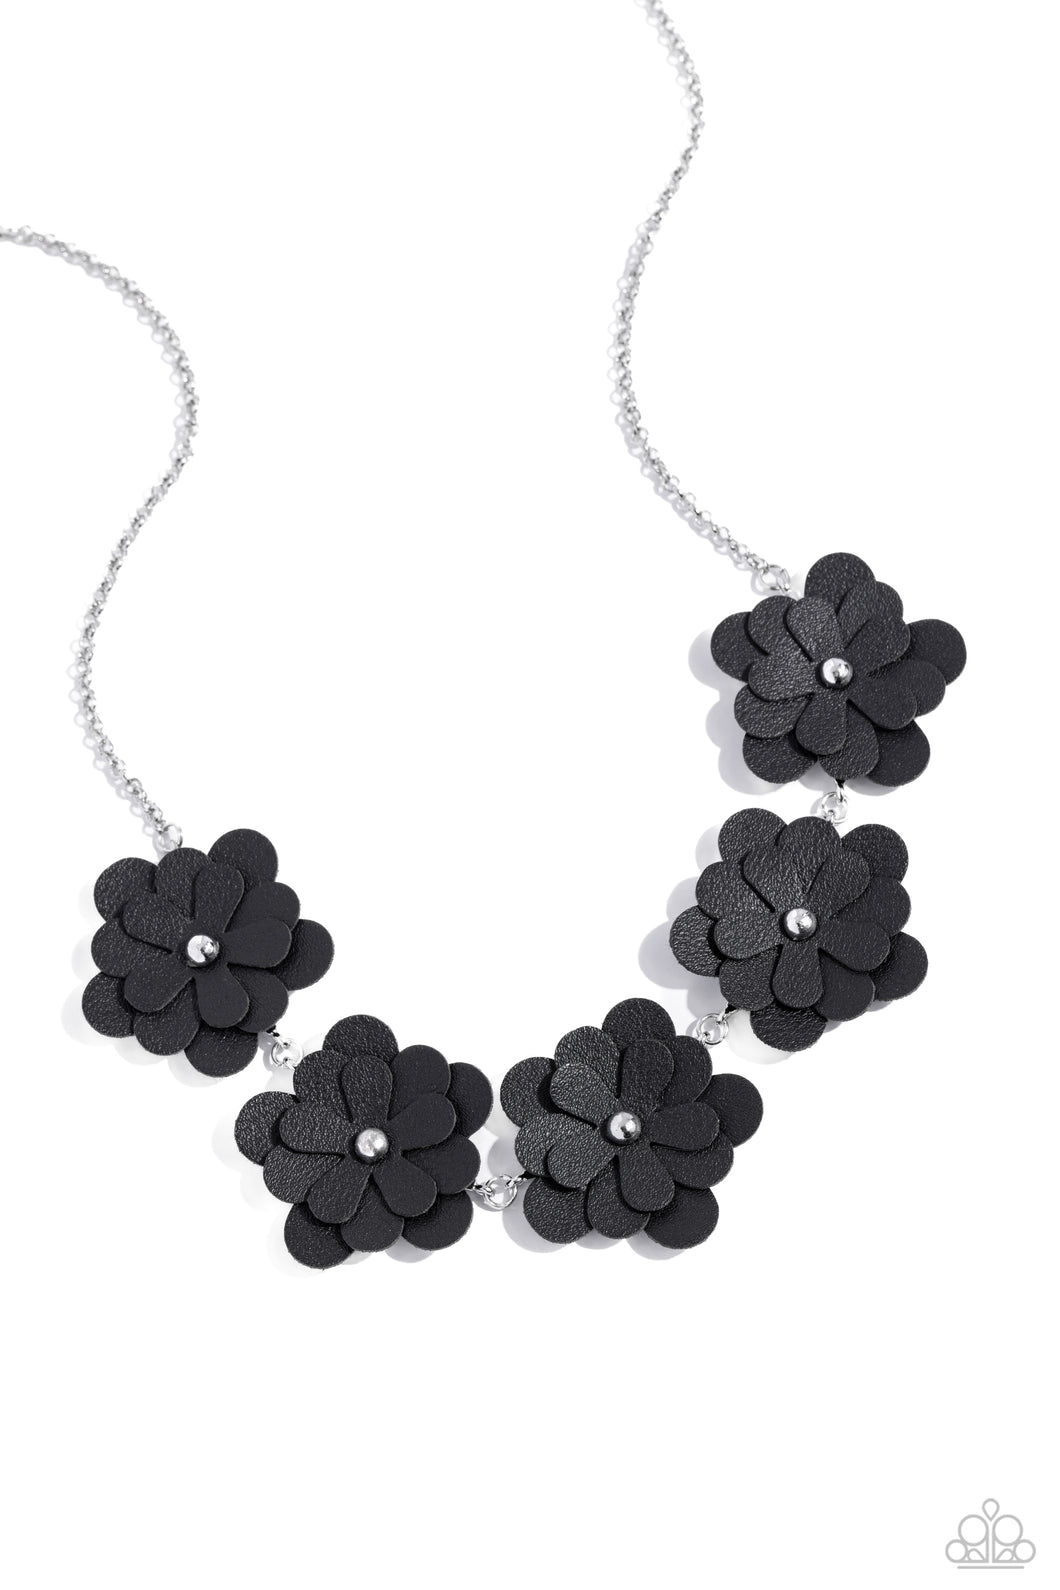 Paparazzi Necklace Balance of FLOWER - Black Coming Soon